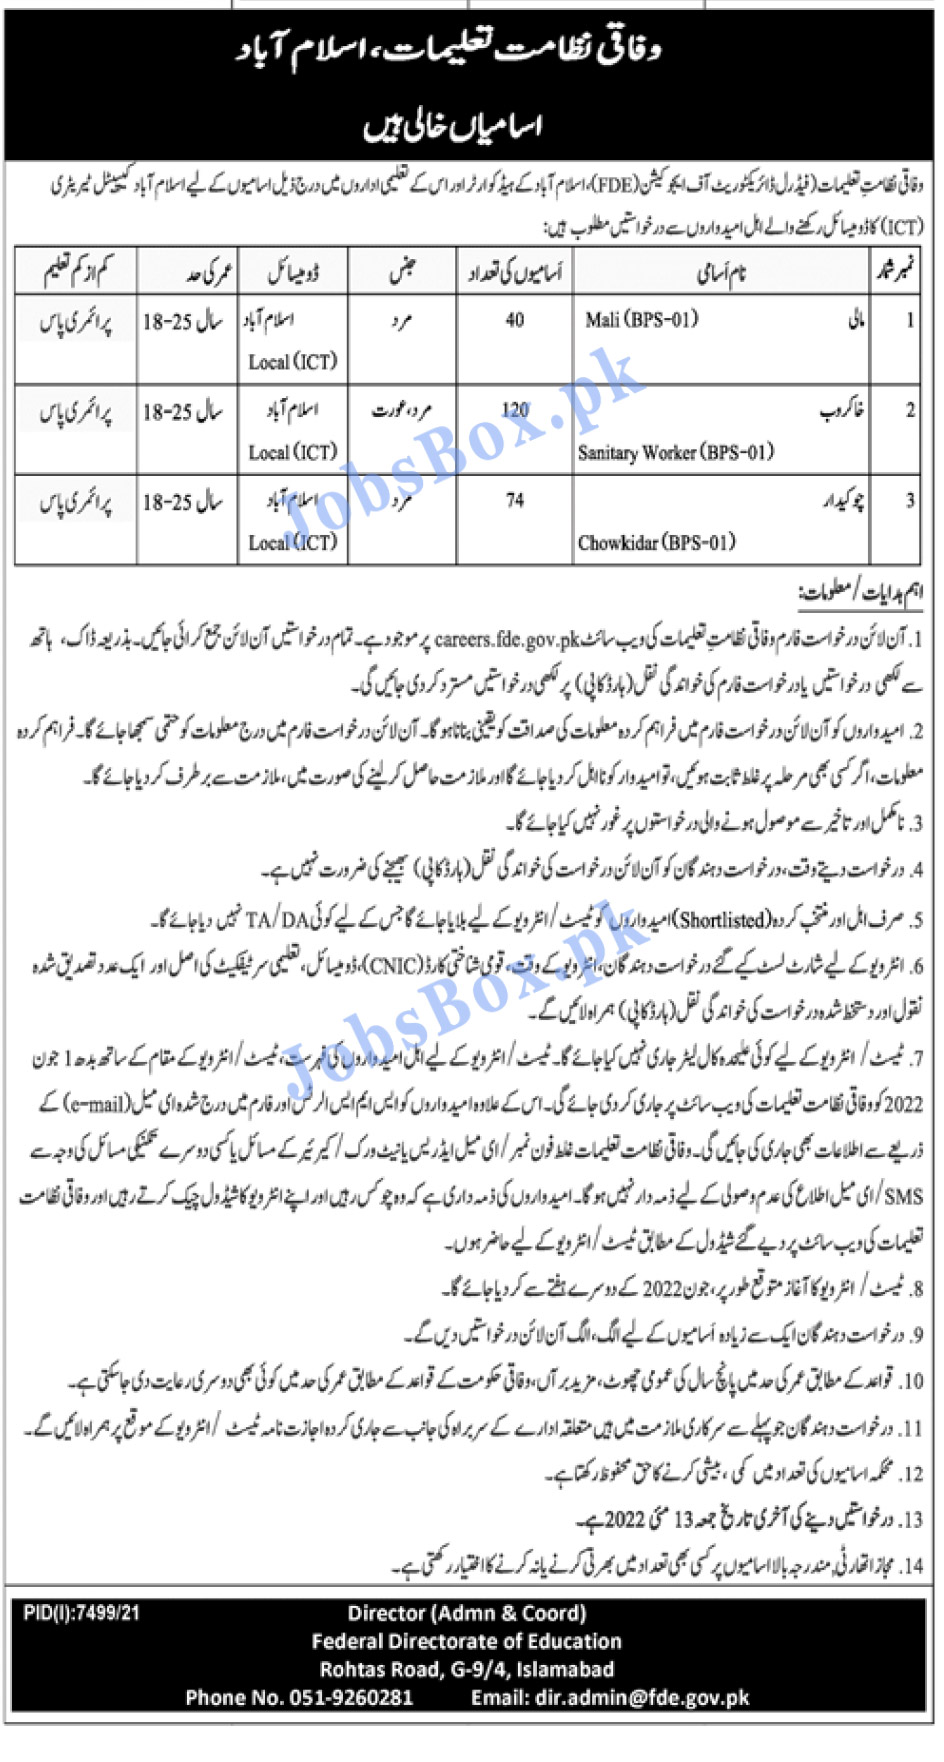 Federal Directorate of Education FDE Jobs 2022 at careers.fde.gov.pk